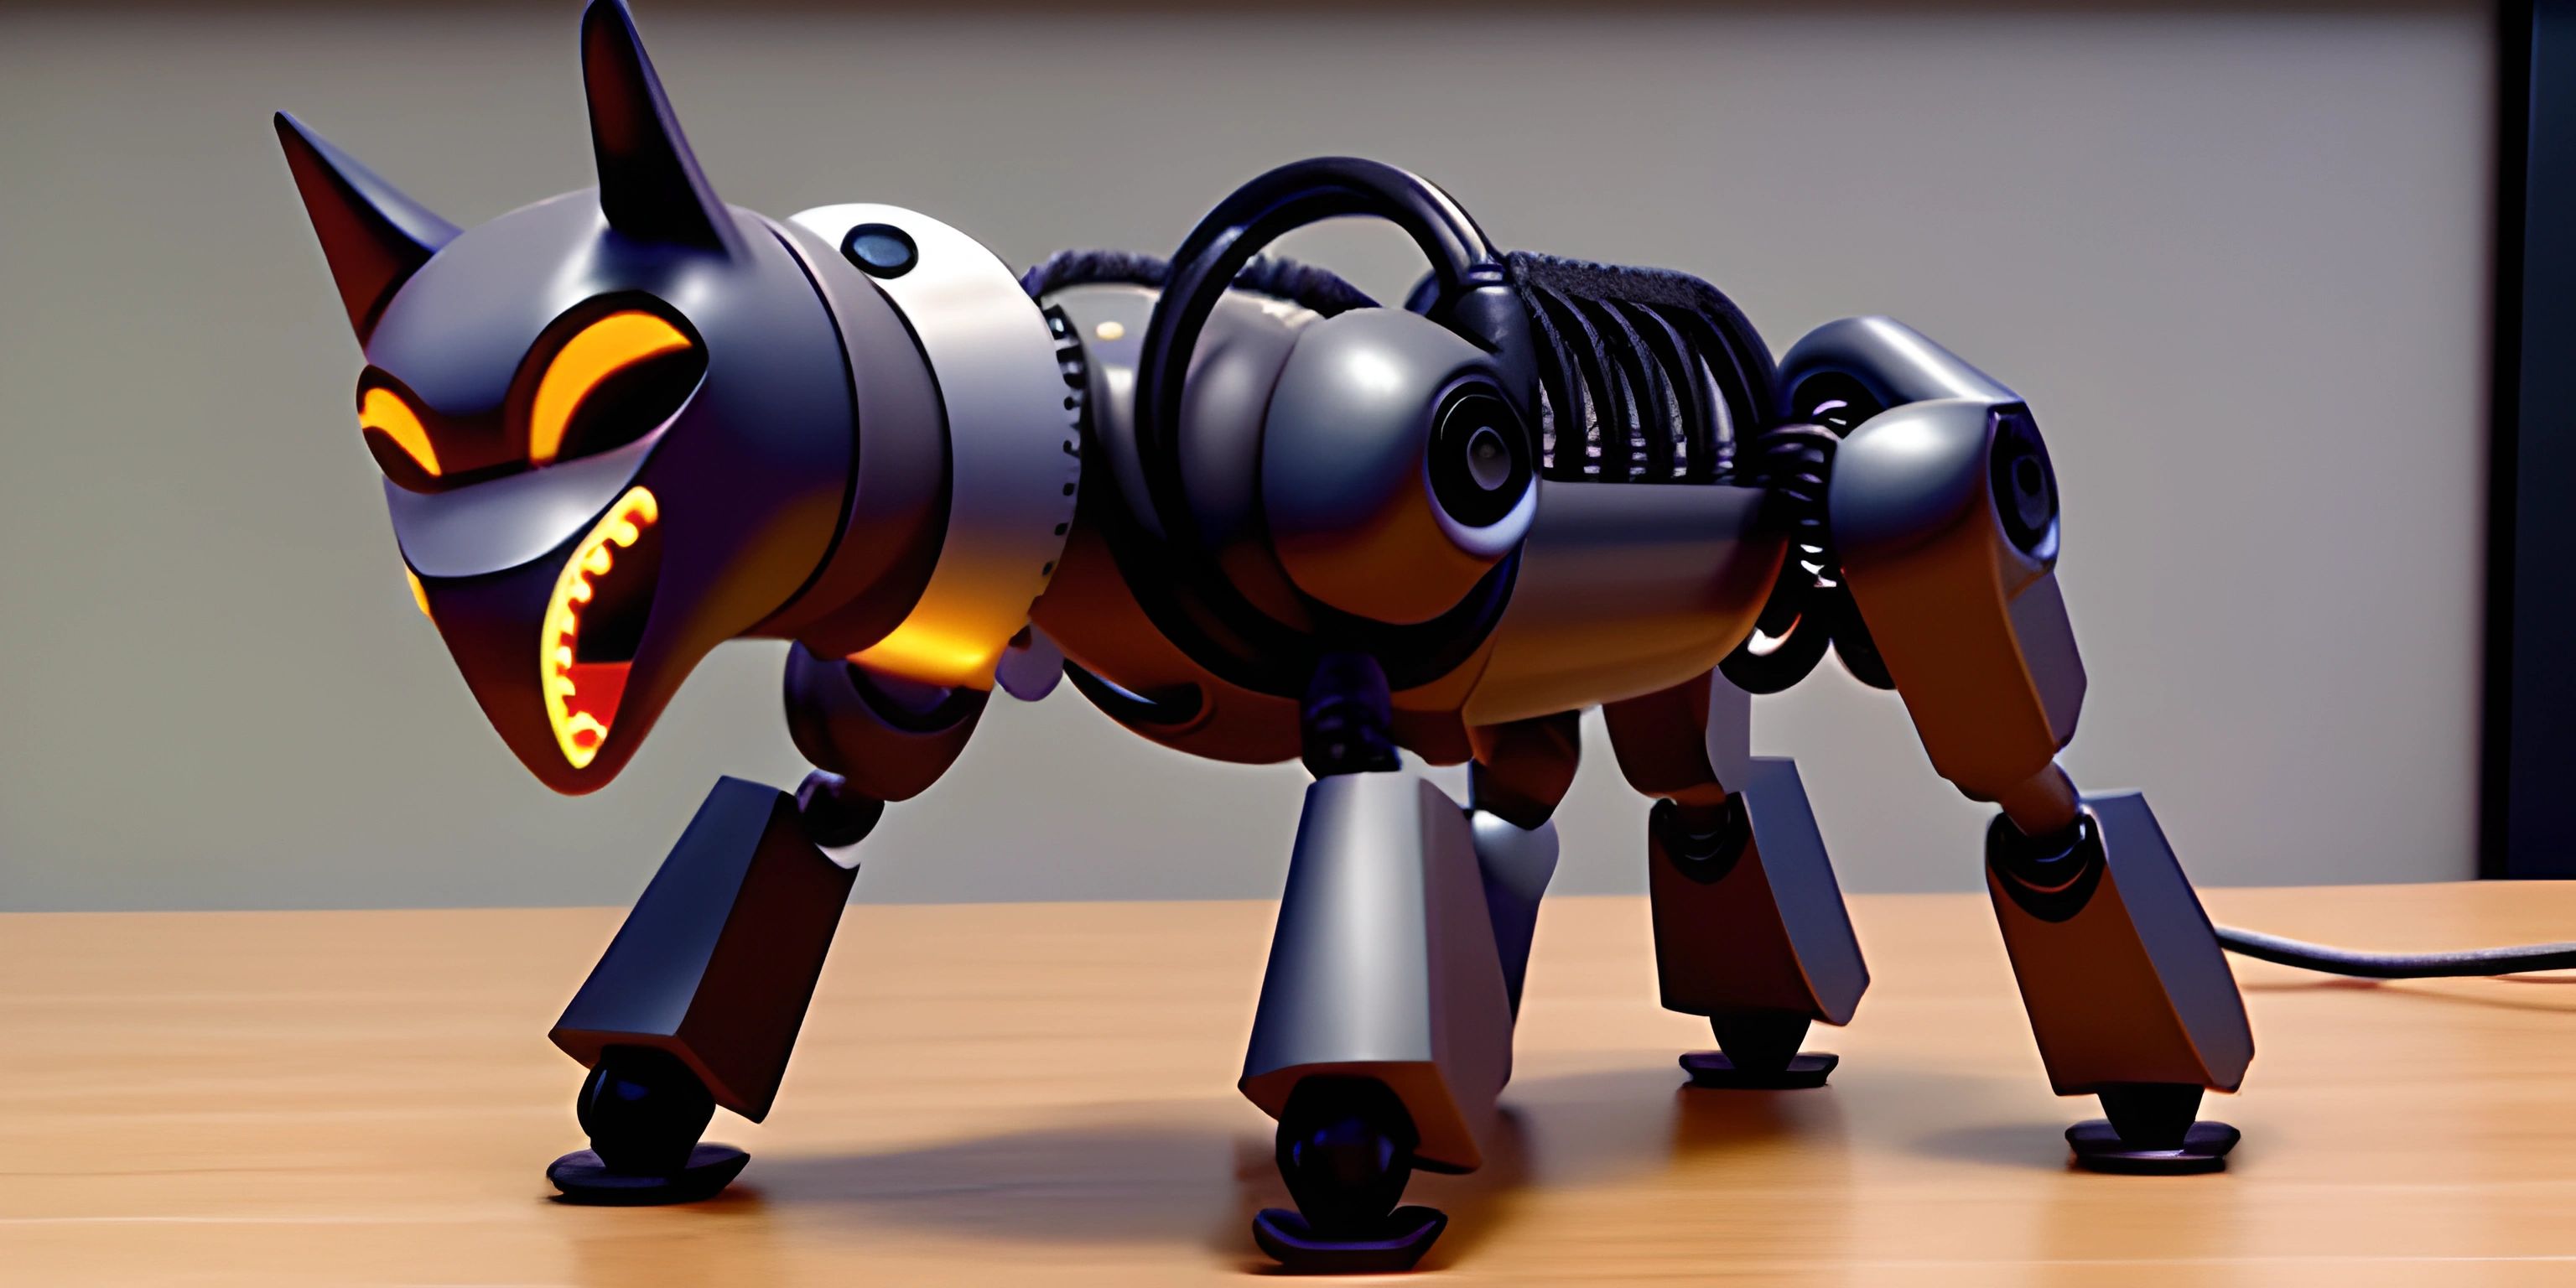 an interesting and creative robot dog on a table in front of a tv or a computer monitor